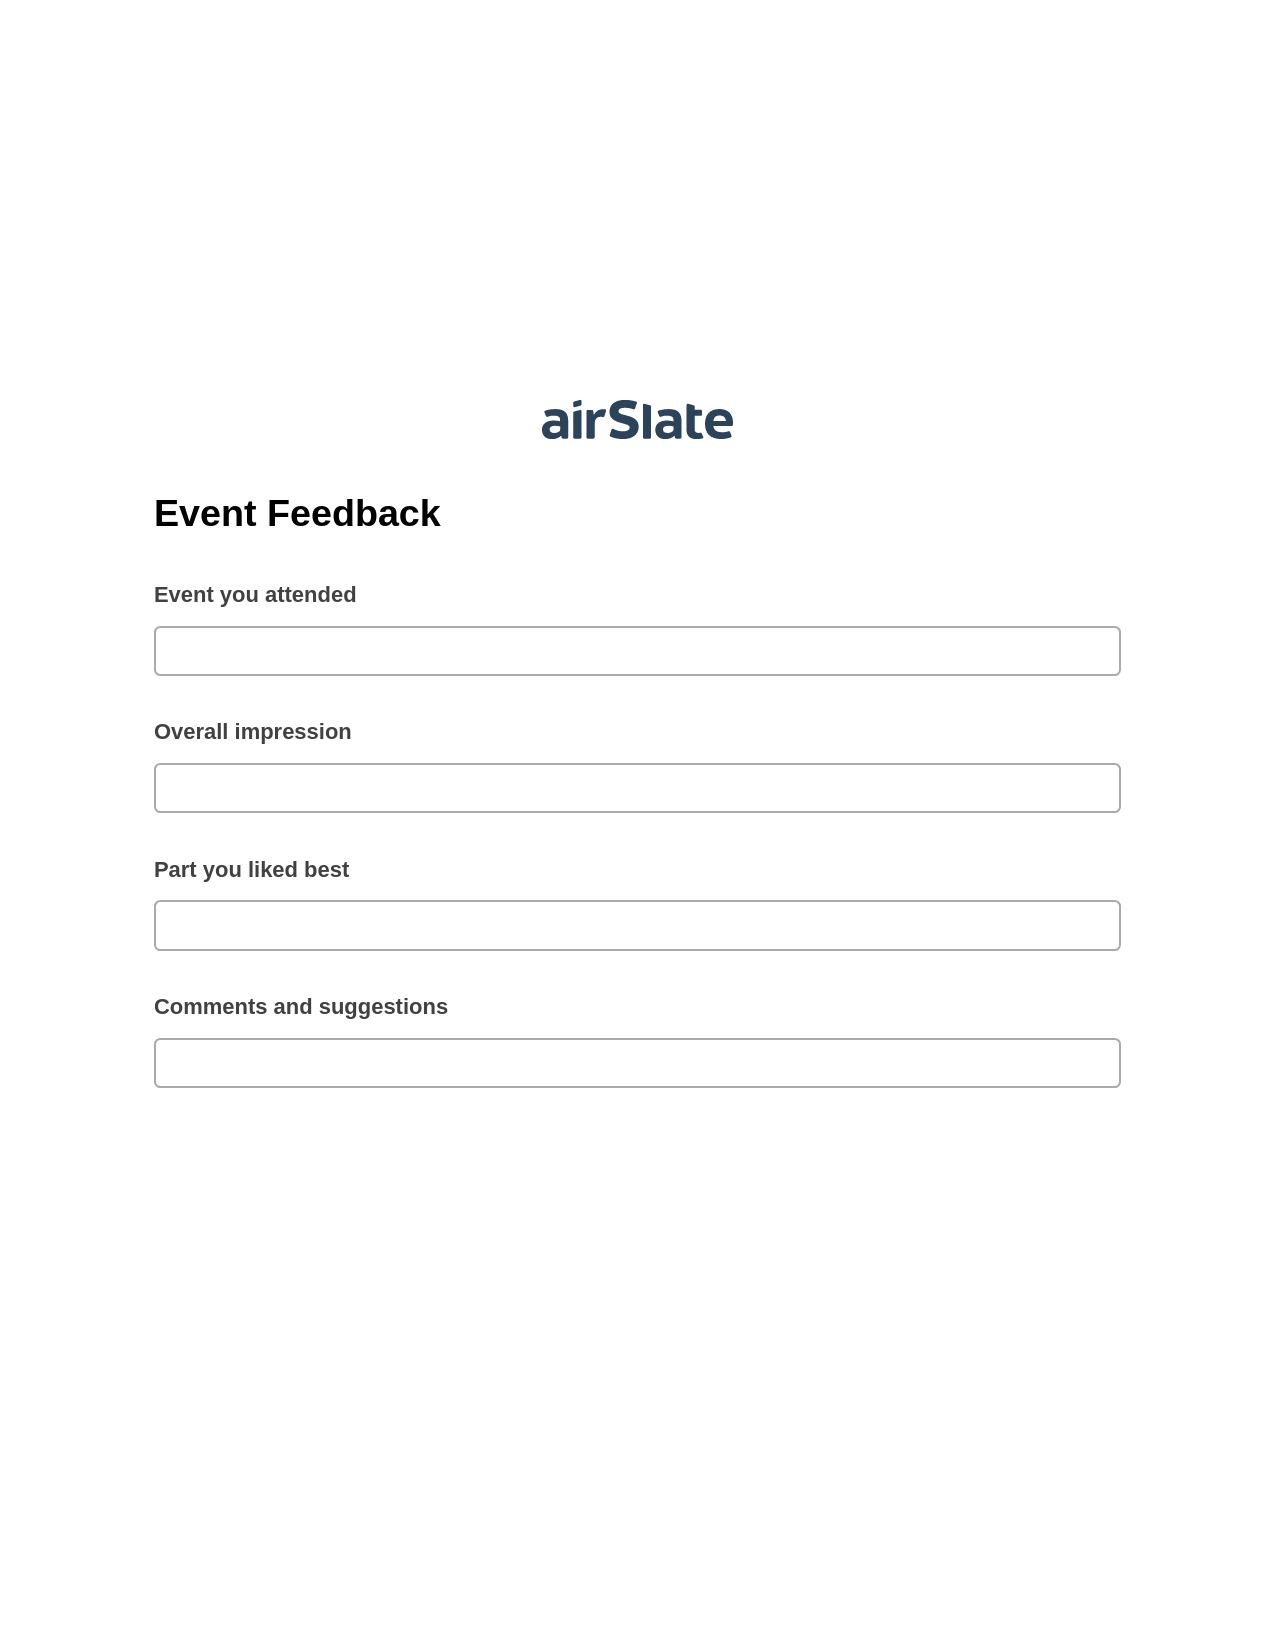 Event Feedback Pre-fill Slate from MS Dynamics 365 Records Bot, Update MS Dynamics 365 Records Bot, Dropbox Bot